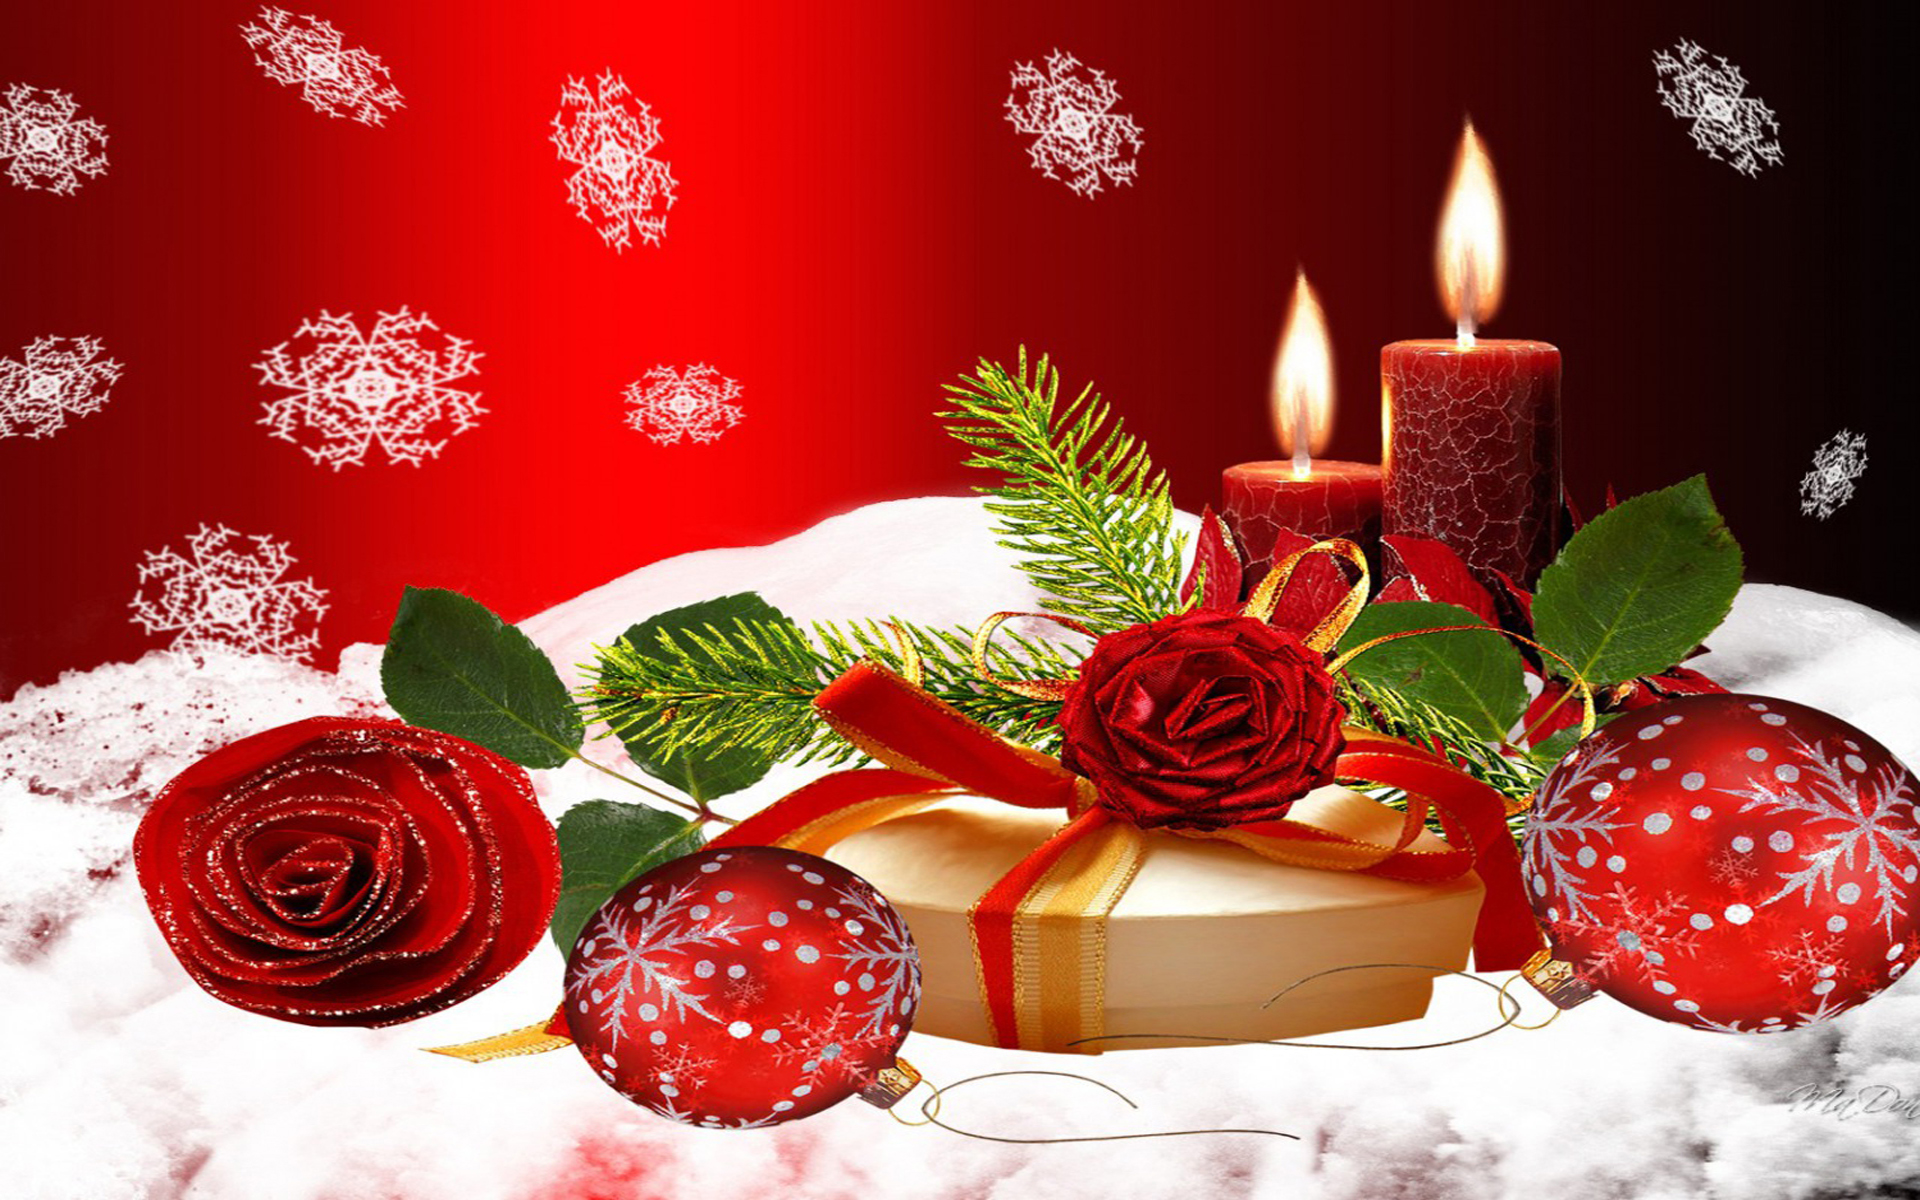 Christmas Candles With Red Rose On Snow 1418, Wallpaper13.com